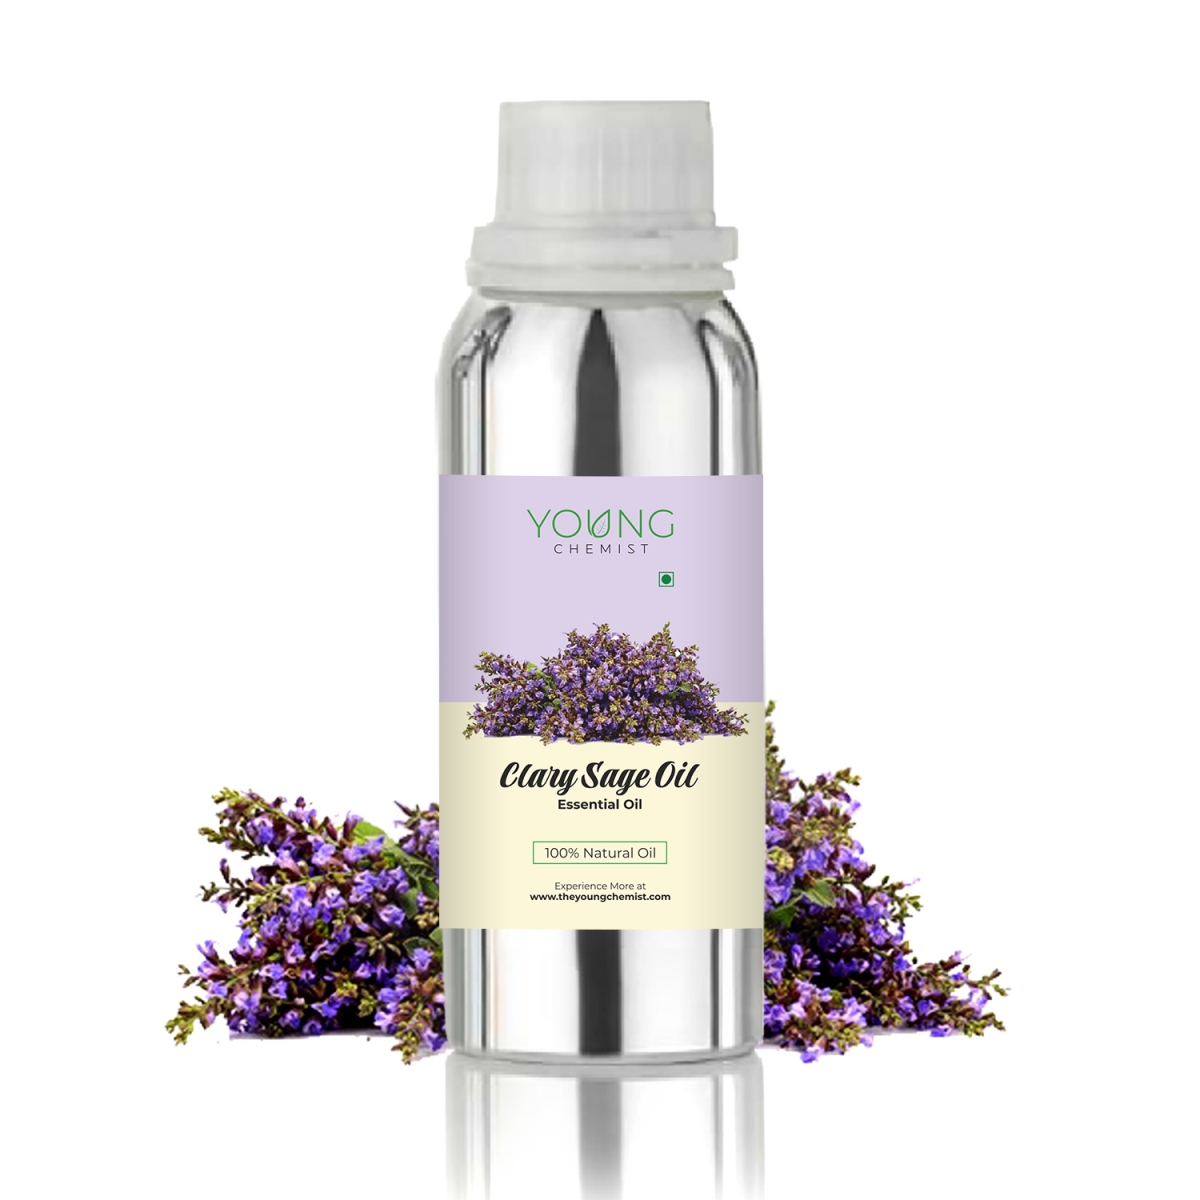 Natural and Pure Essential Oils - Raw Ingredients - Fragrance Oils - Theyoungchemist 1059401652203177